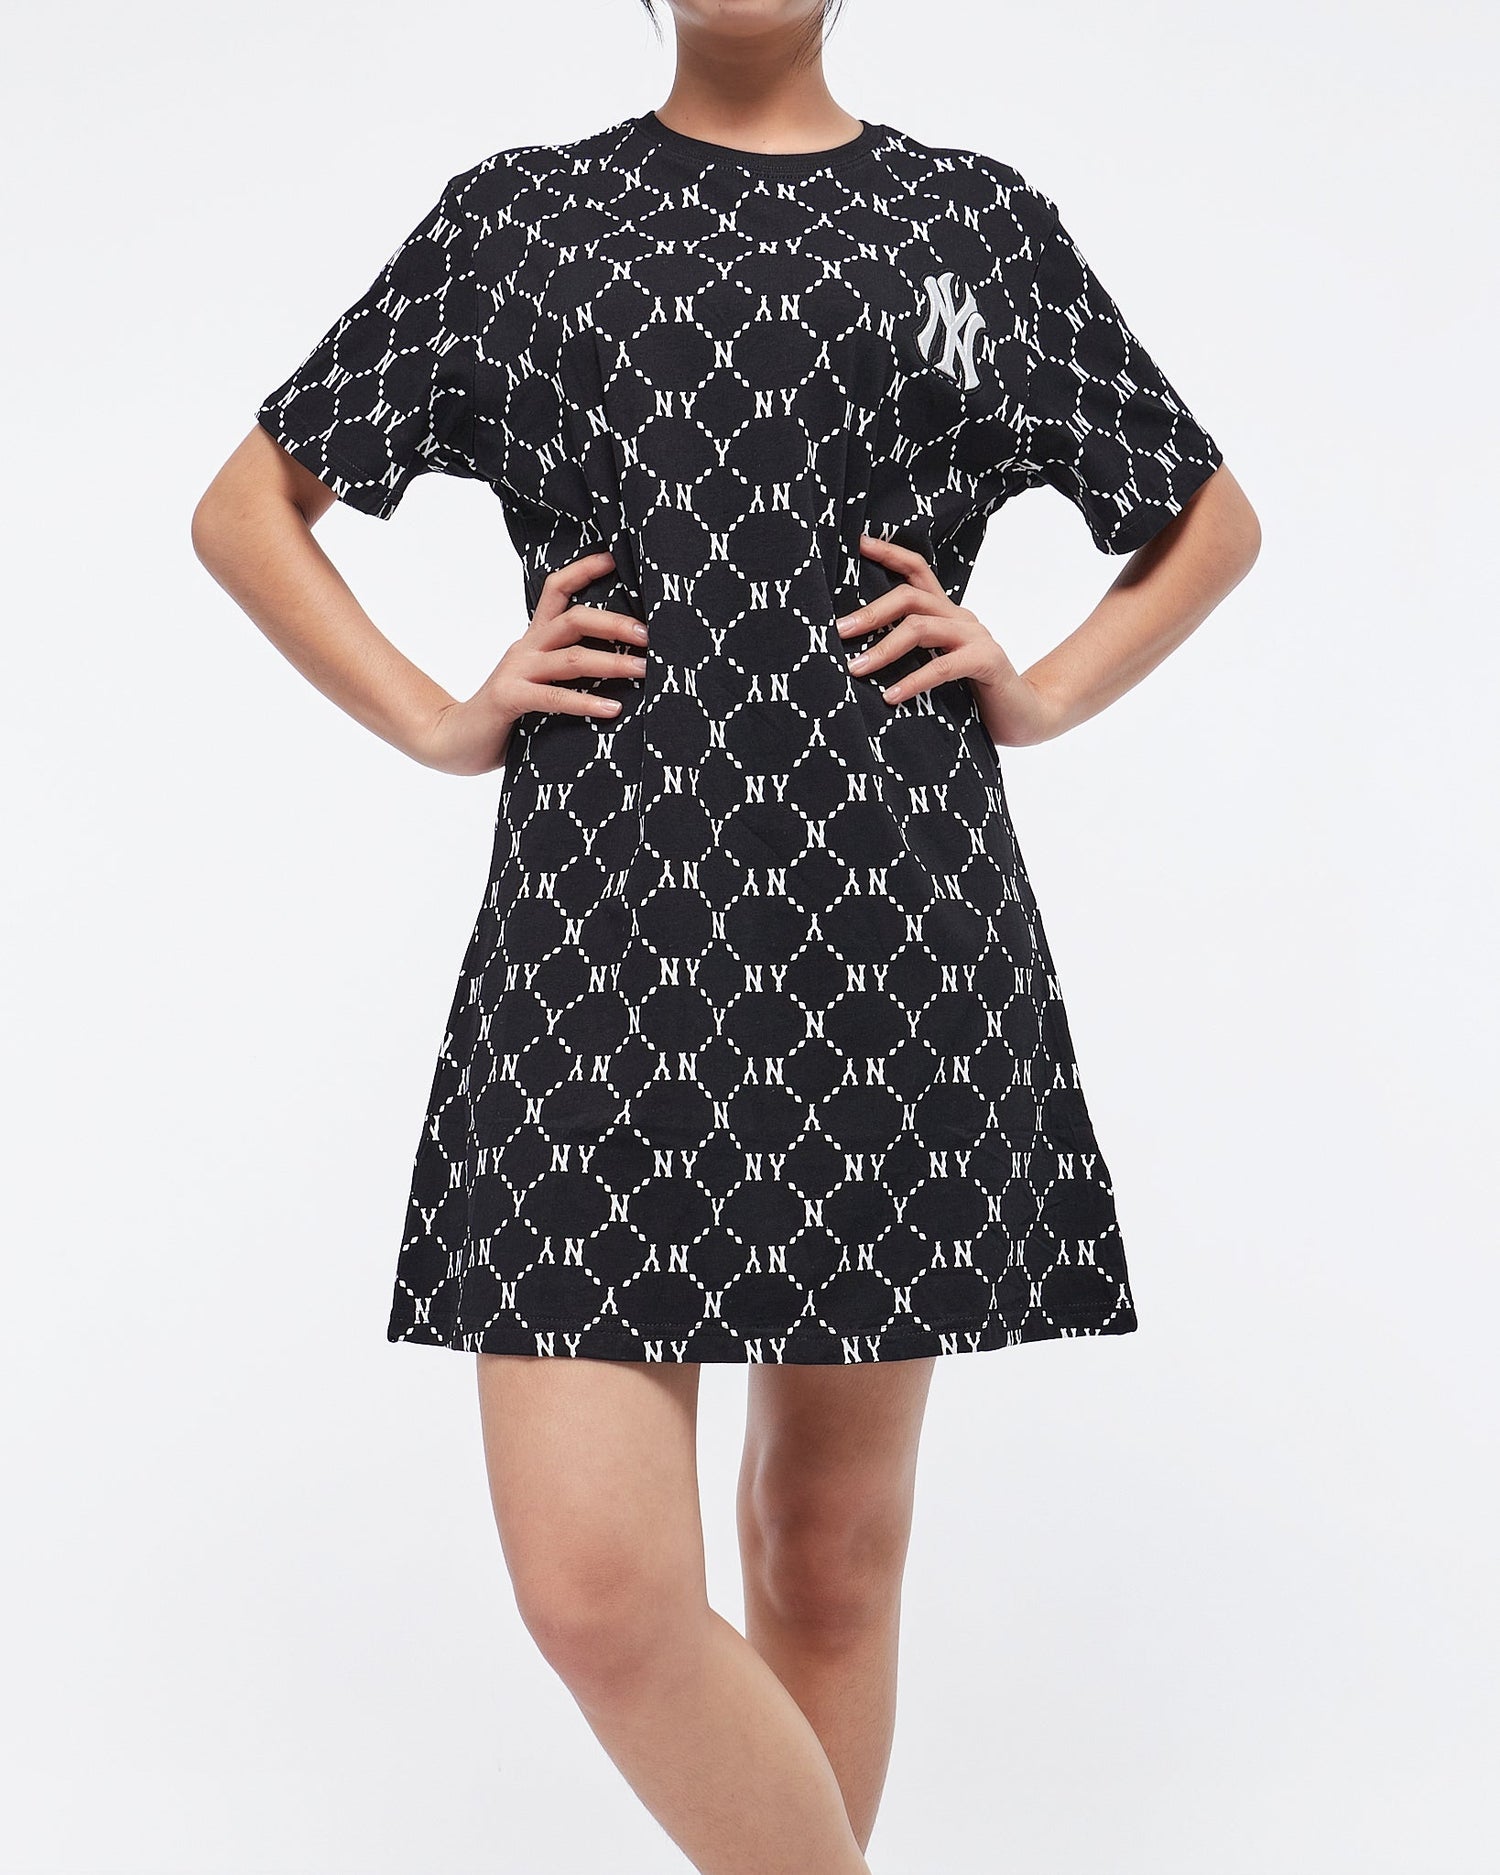 MOI OUTFIT-NY Monogram Over Printed Lady T-Shirt Dress 22.90